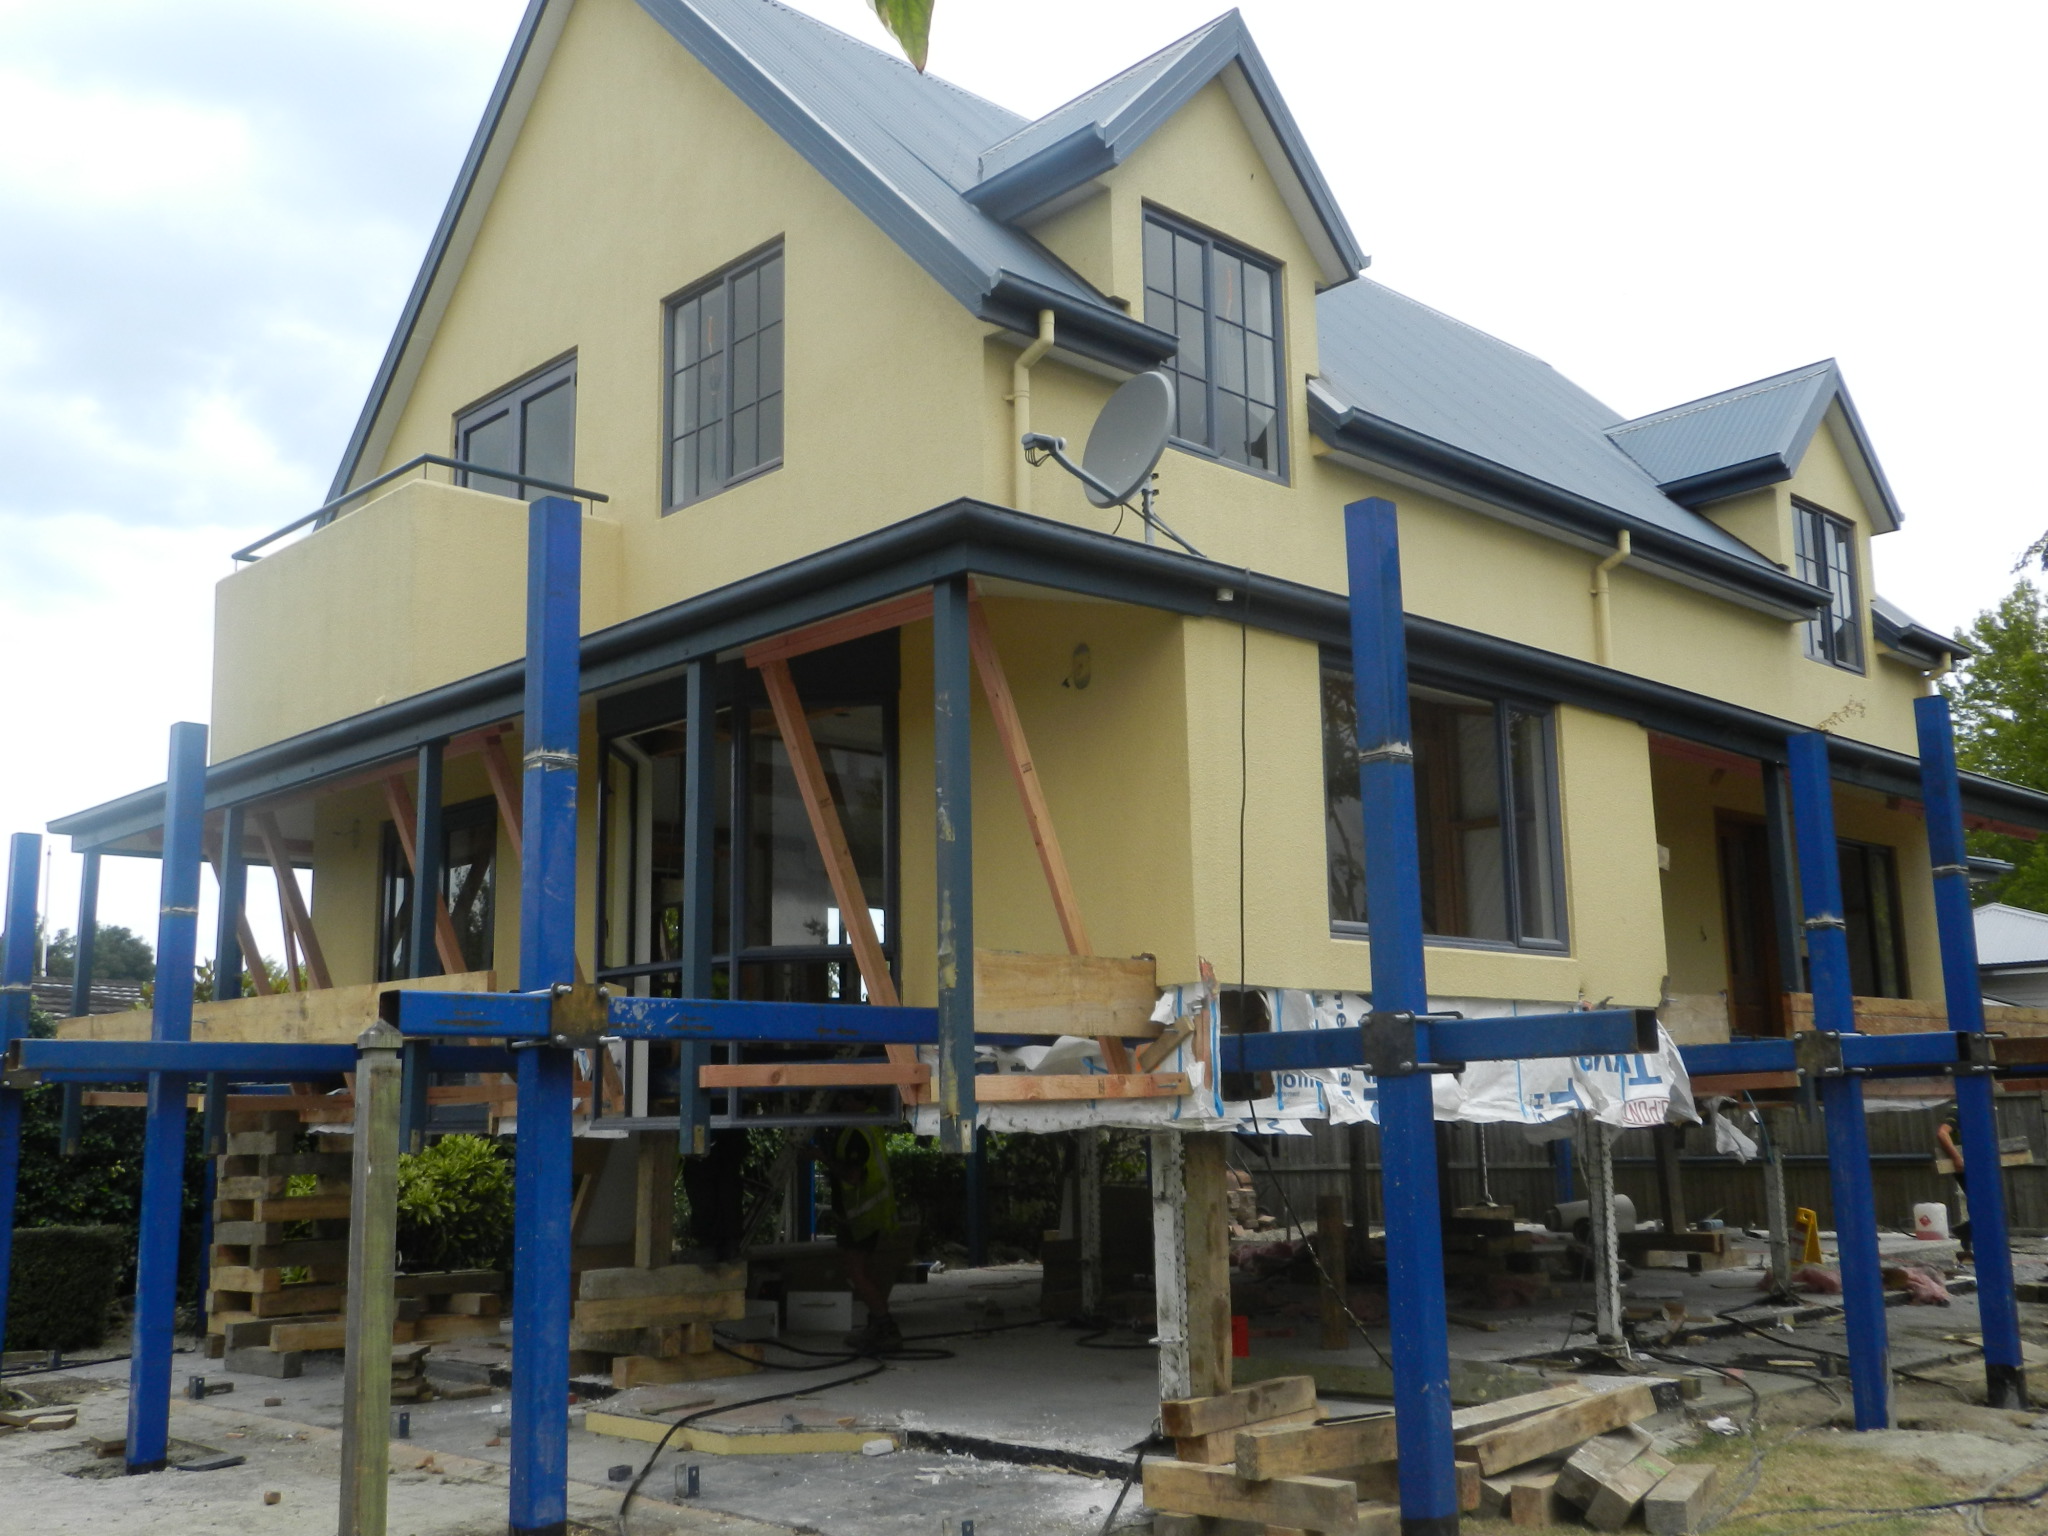 Get the heritage house team to do your next house lifting and foundation replacement in Christchurch